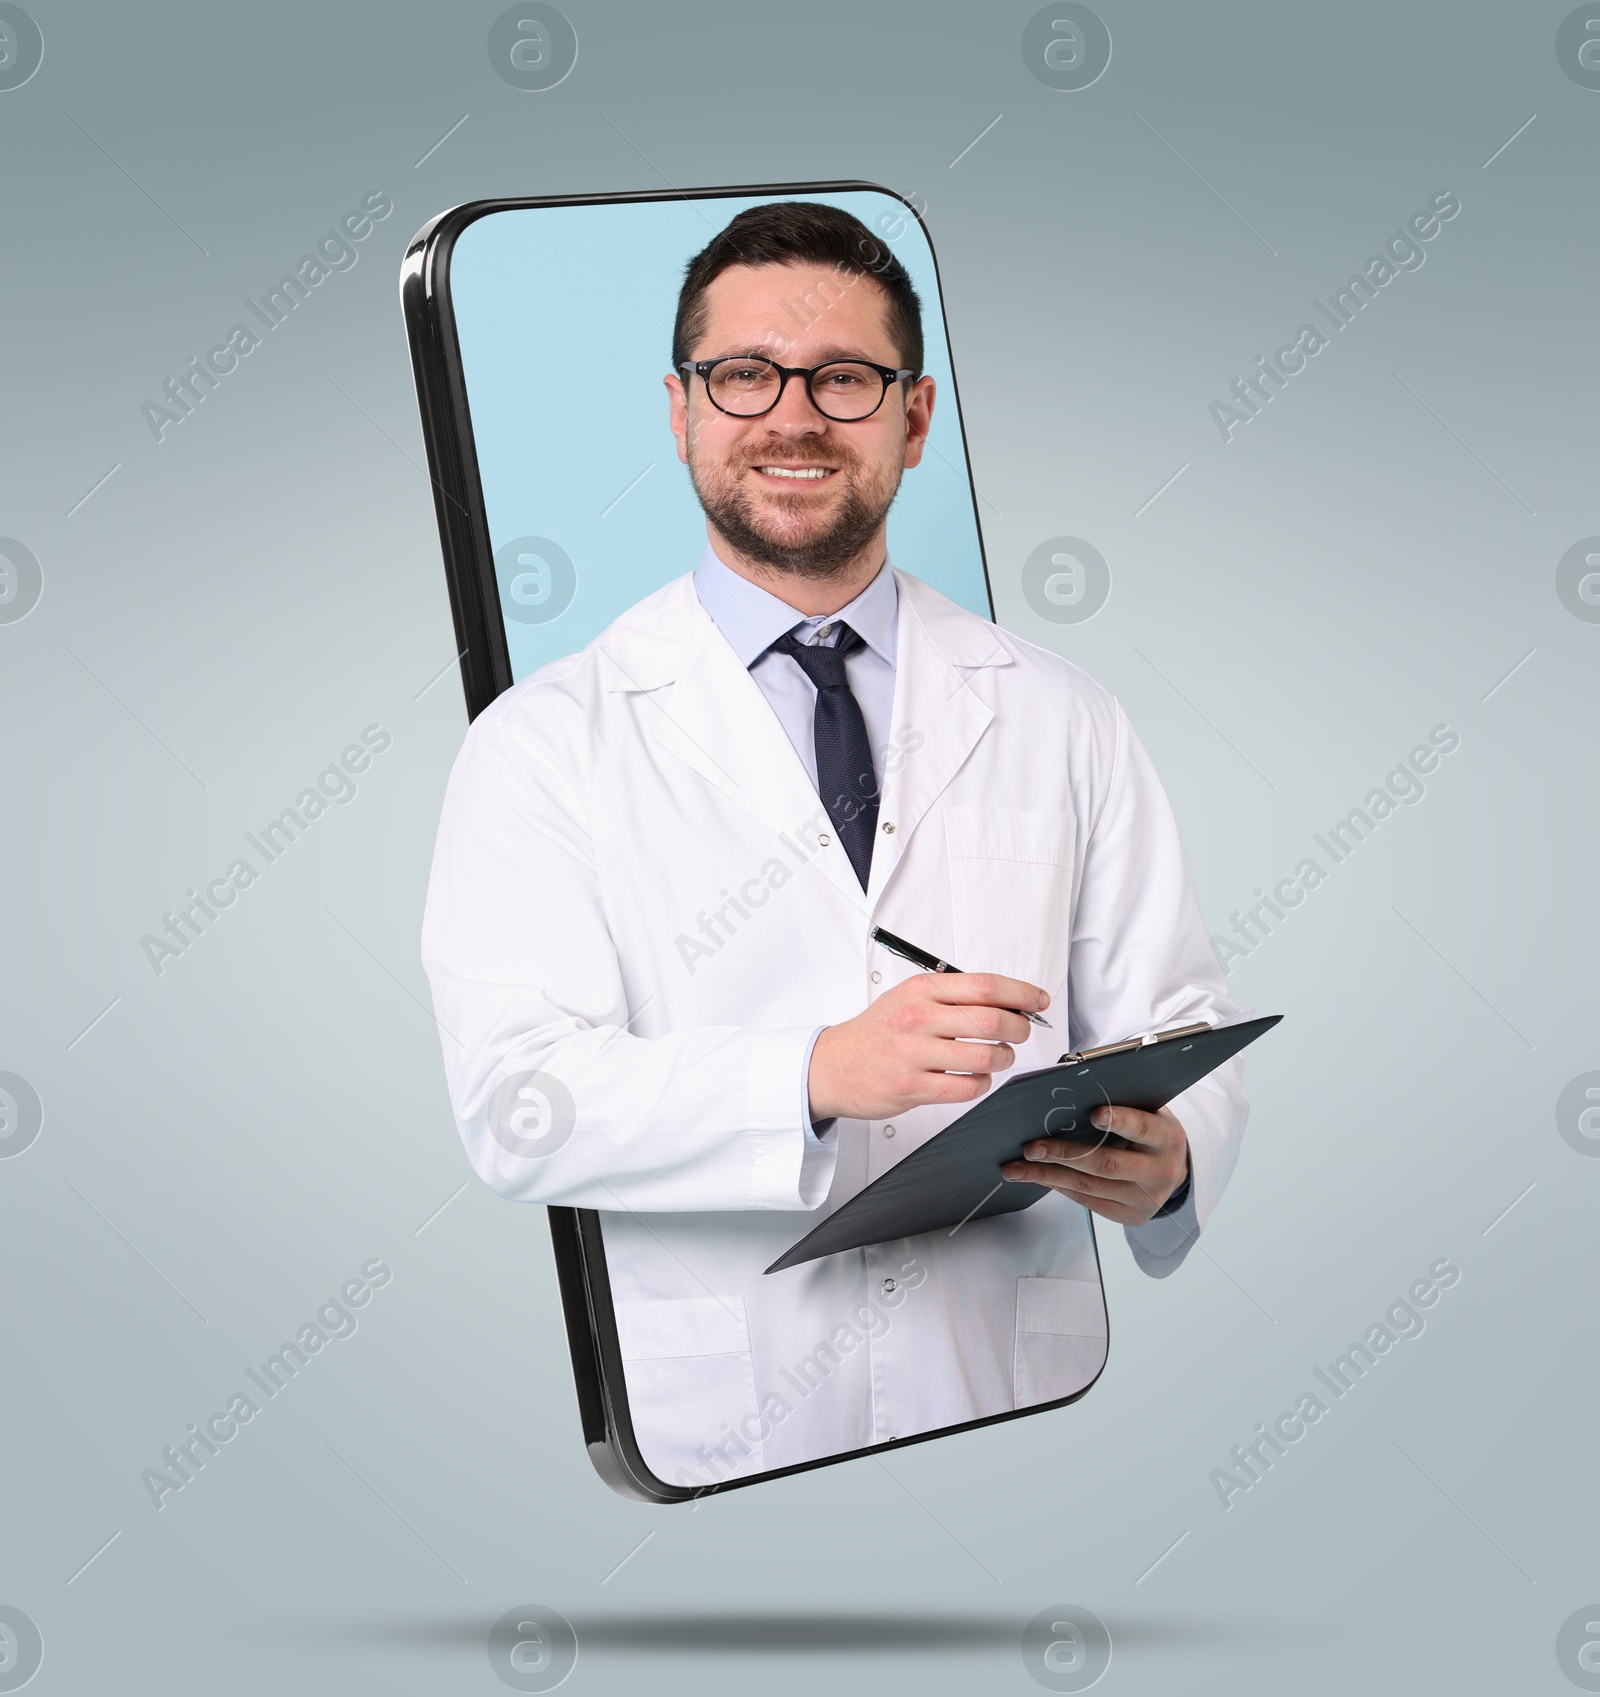 Image of Online medical consultation. Doctor with clipboard on smartphone screen against grey gradient background